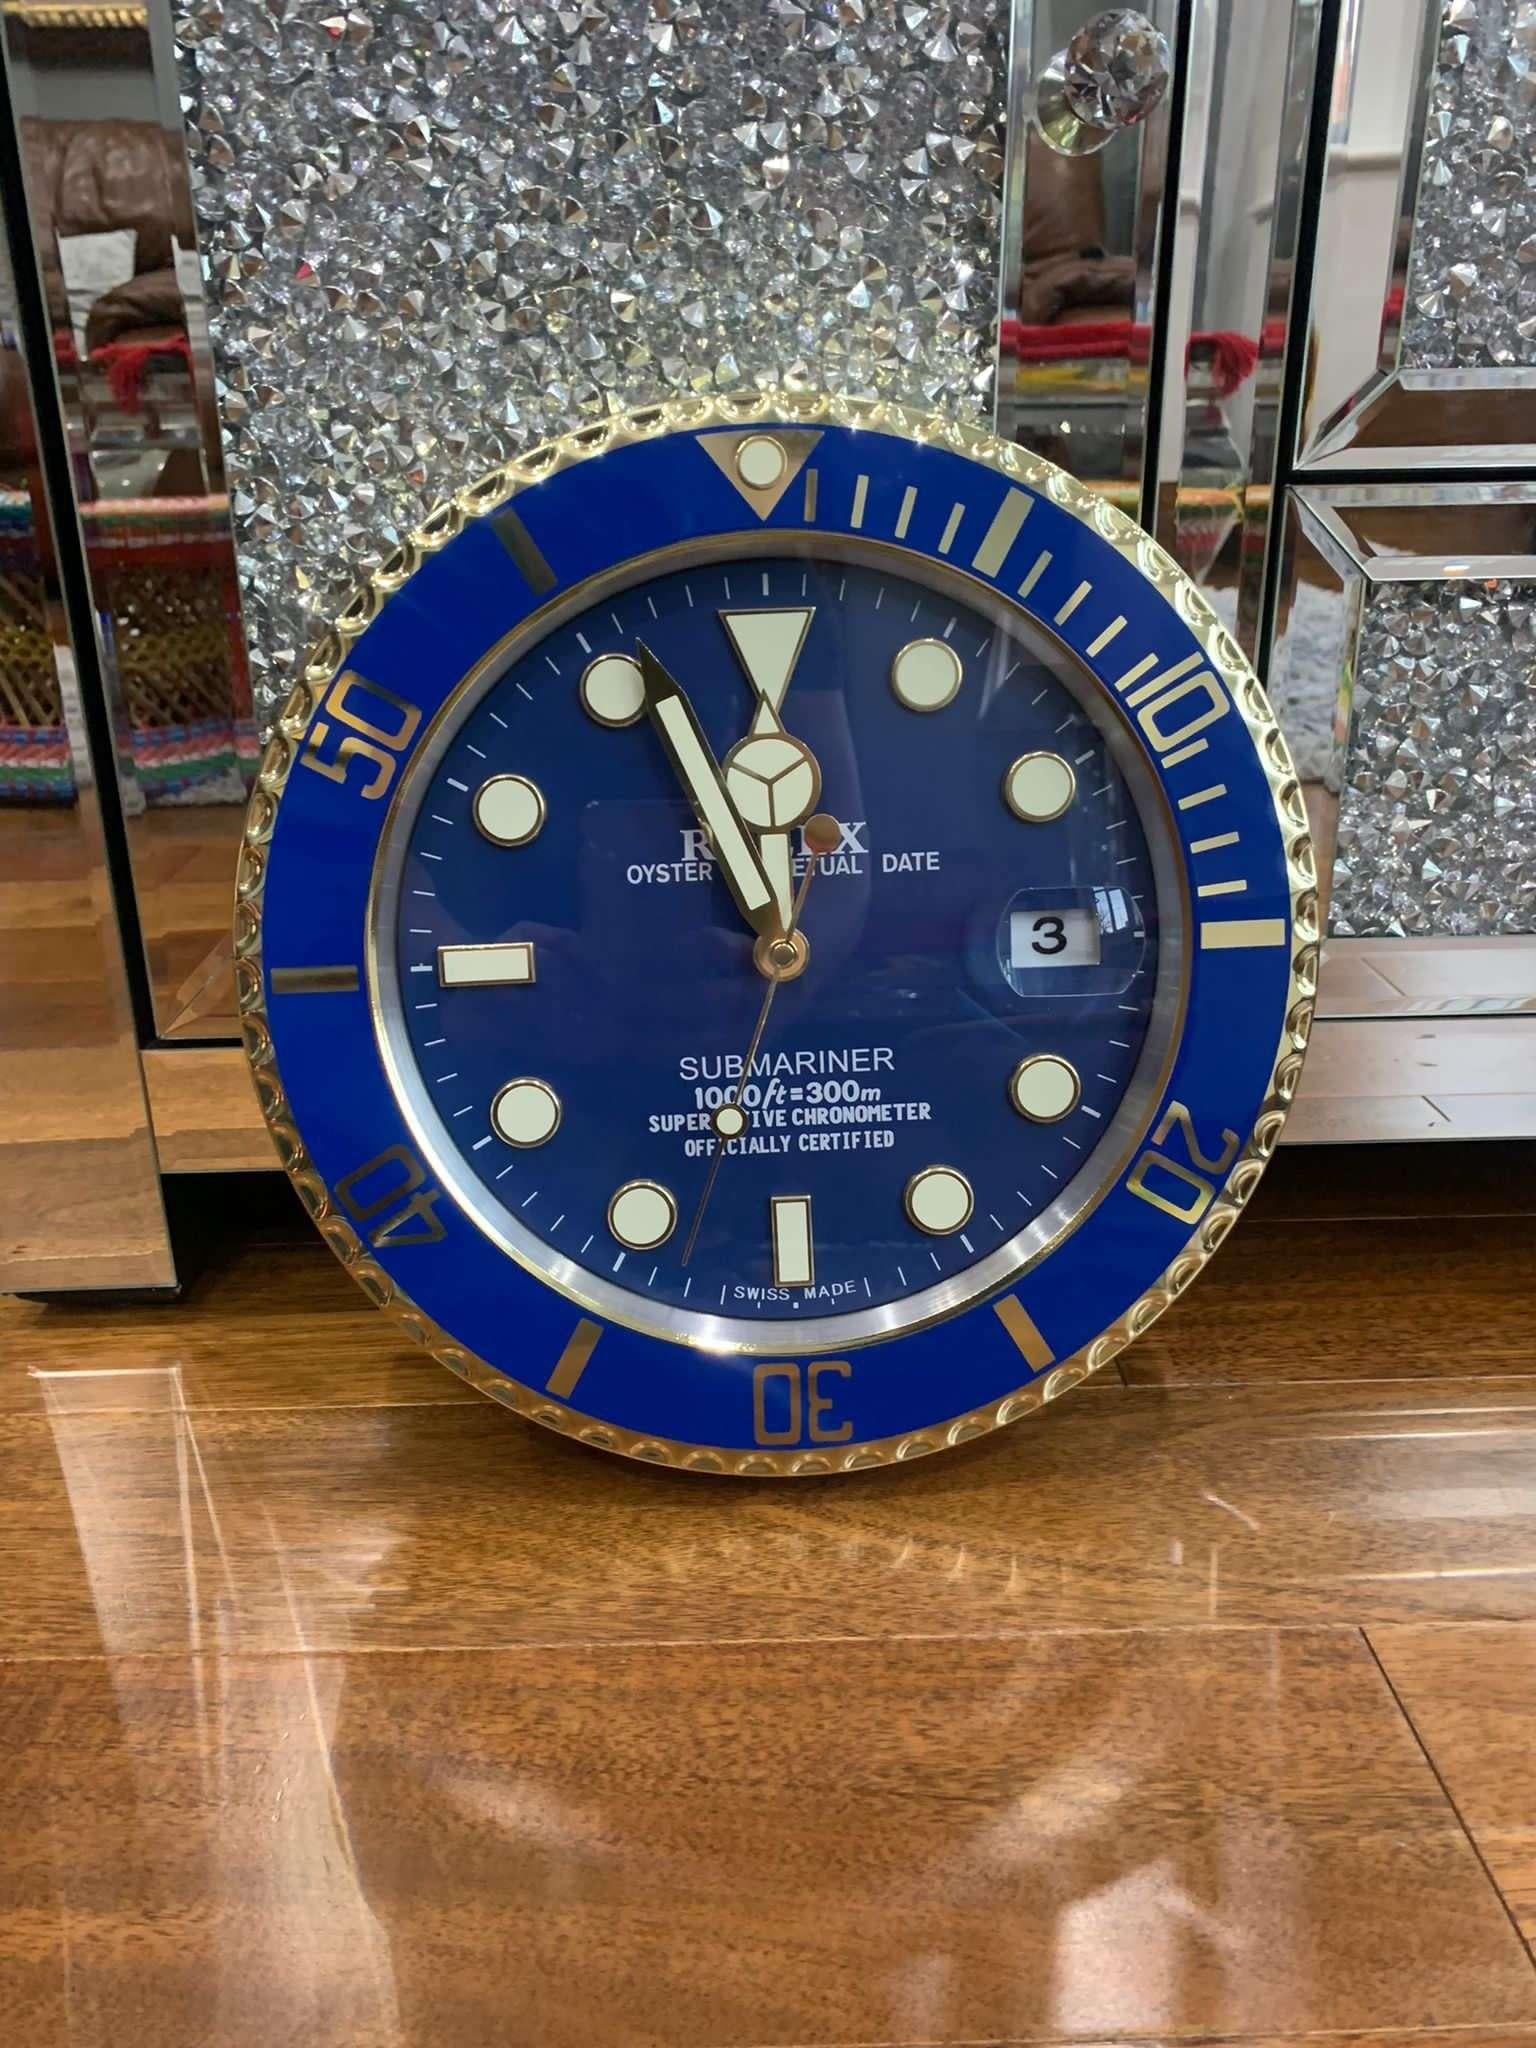 ROLEX Officially Certified Oyster Perpetual Submariner Blue & Gold Wall Clock. With luminous hands, sweeping hands.
Free international shipping.